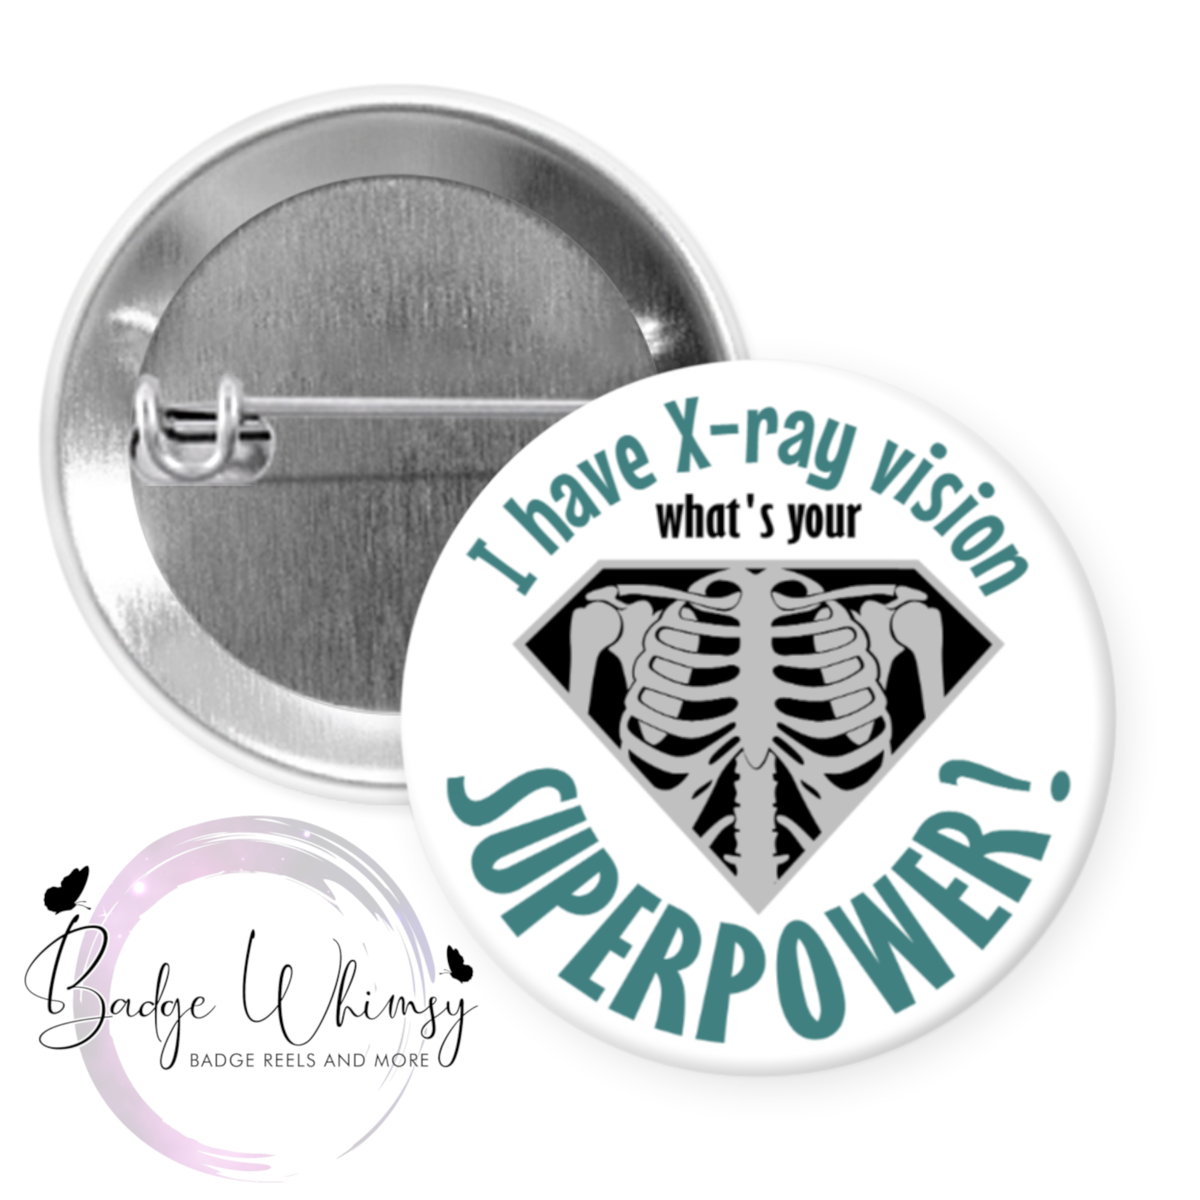 I have X-ray vision - What's Your Superpower-Pin, Magnet or Badge